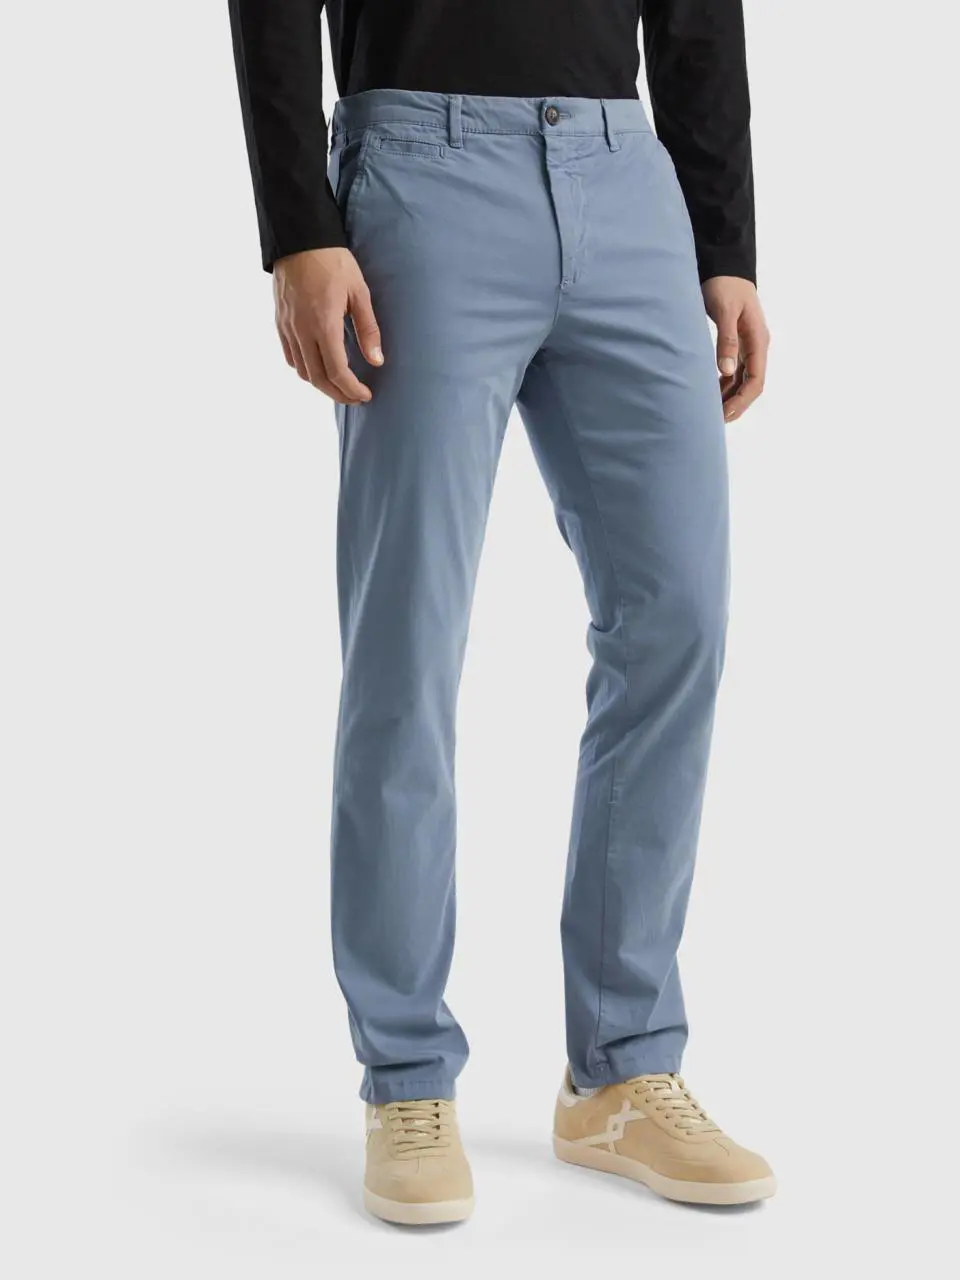 Benetton air force blue slim fit chinos. 1